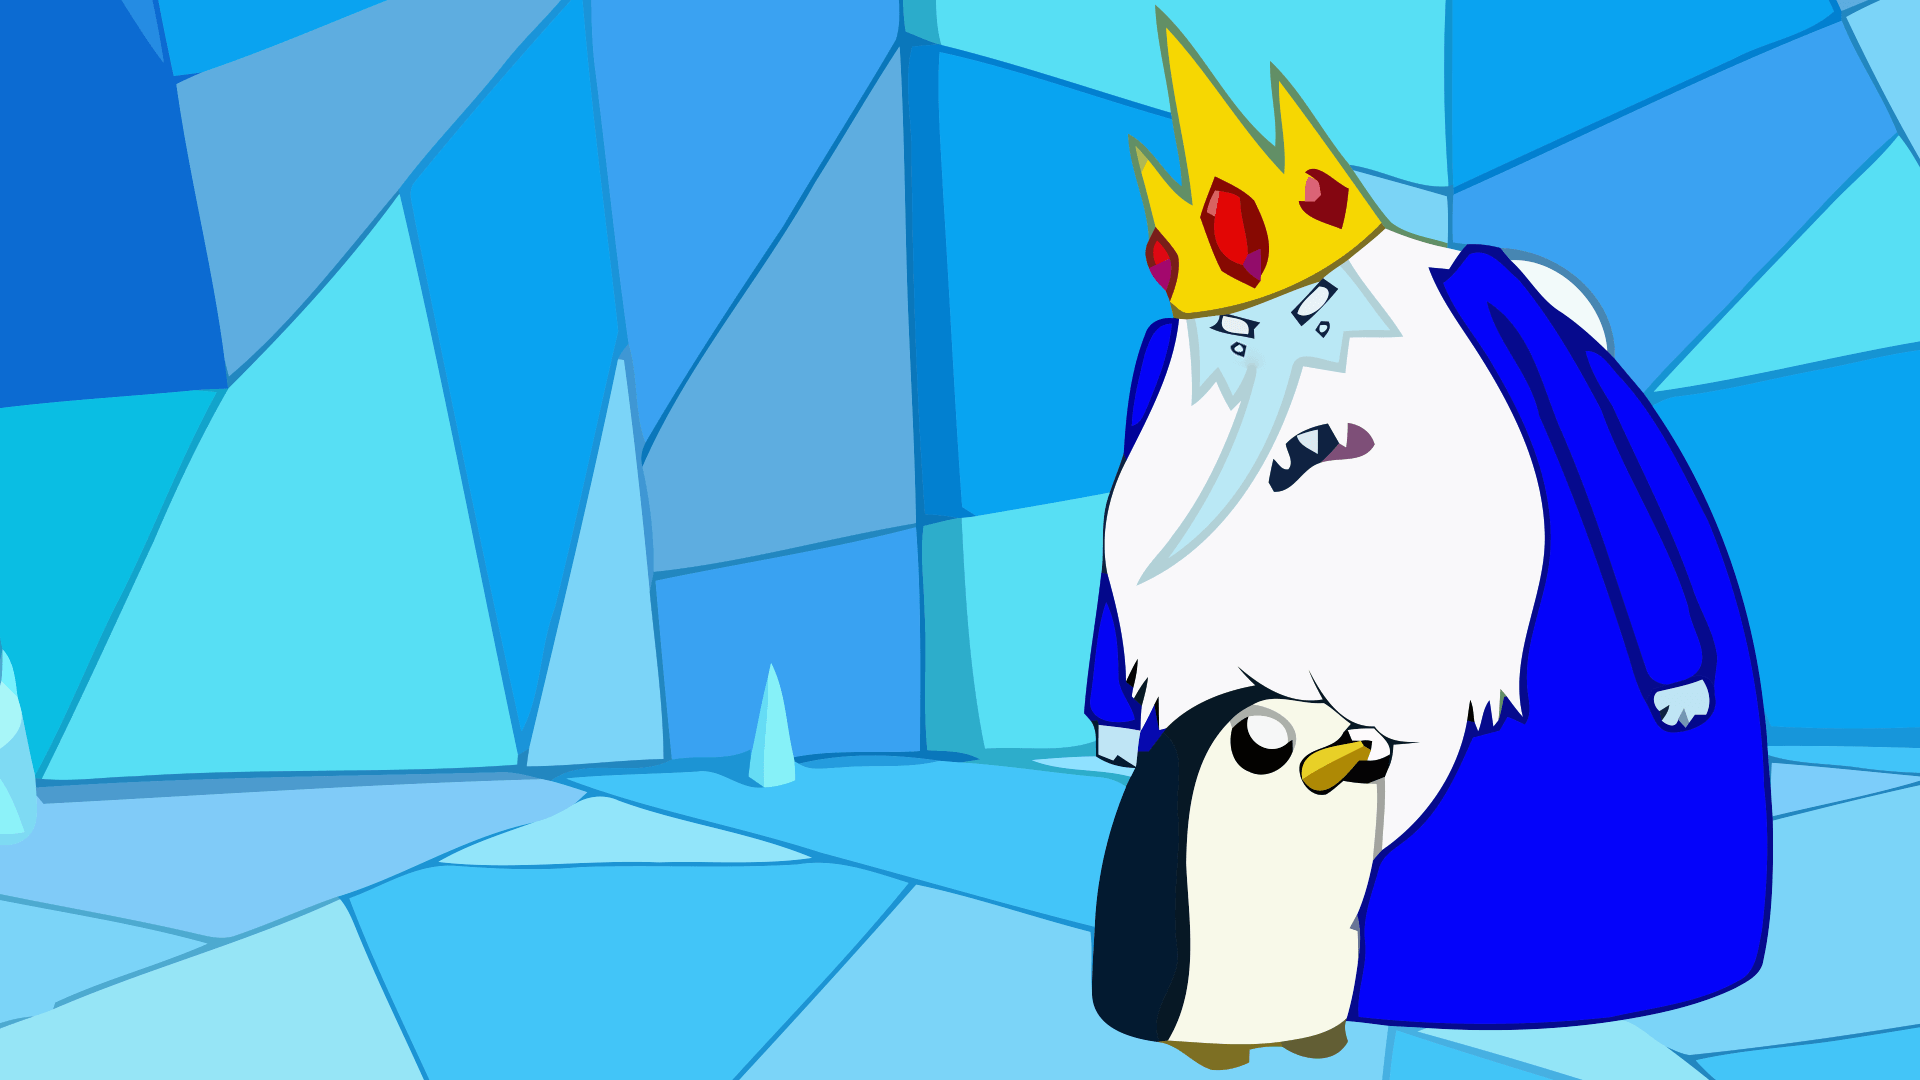 Ice King Wallpapers